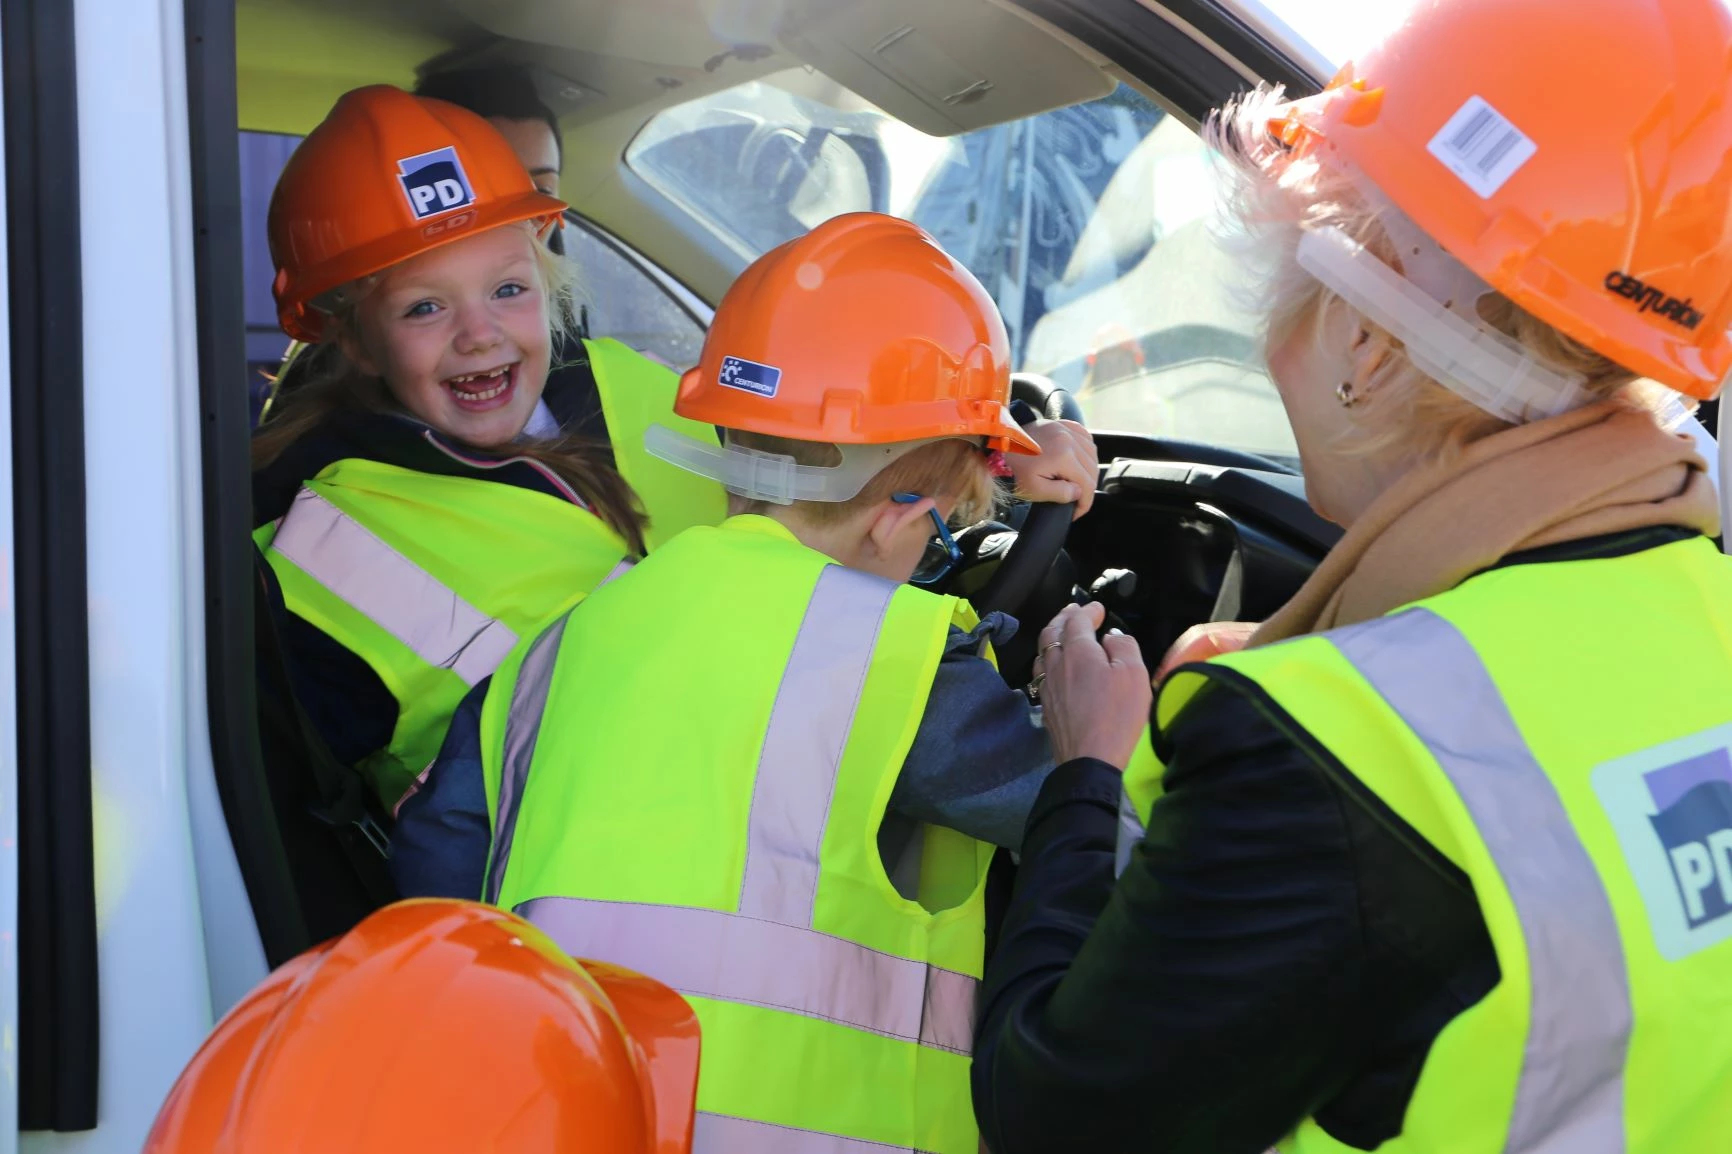 Students from Hartburn Primary School enjoy a trip around Teesport, taking part in activities and learning more about the industry.